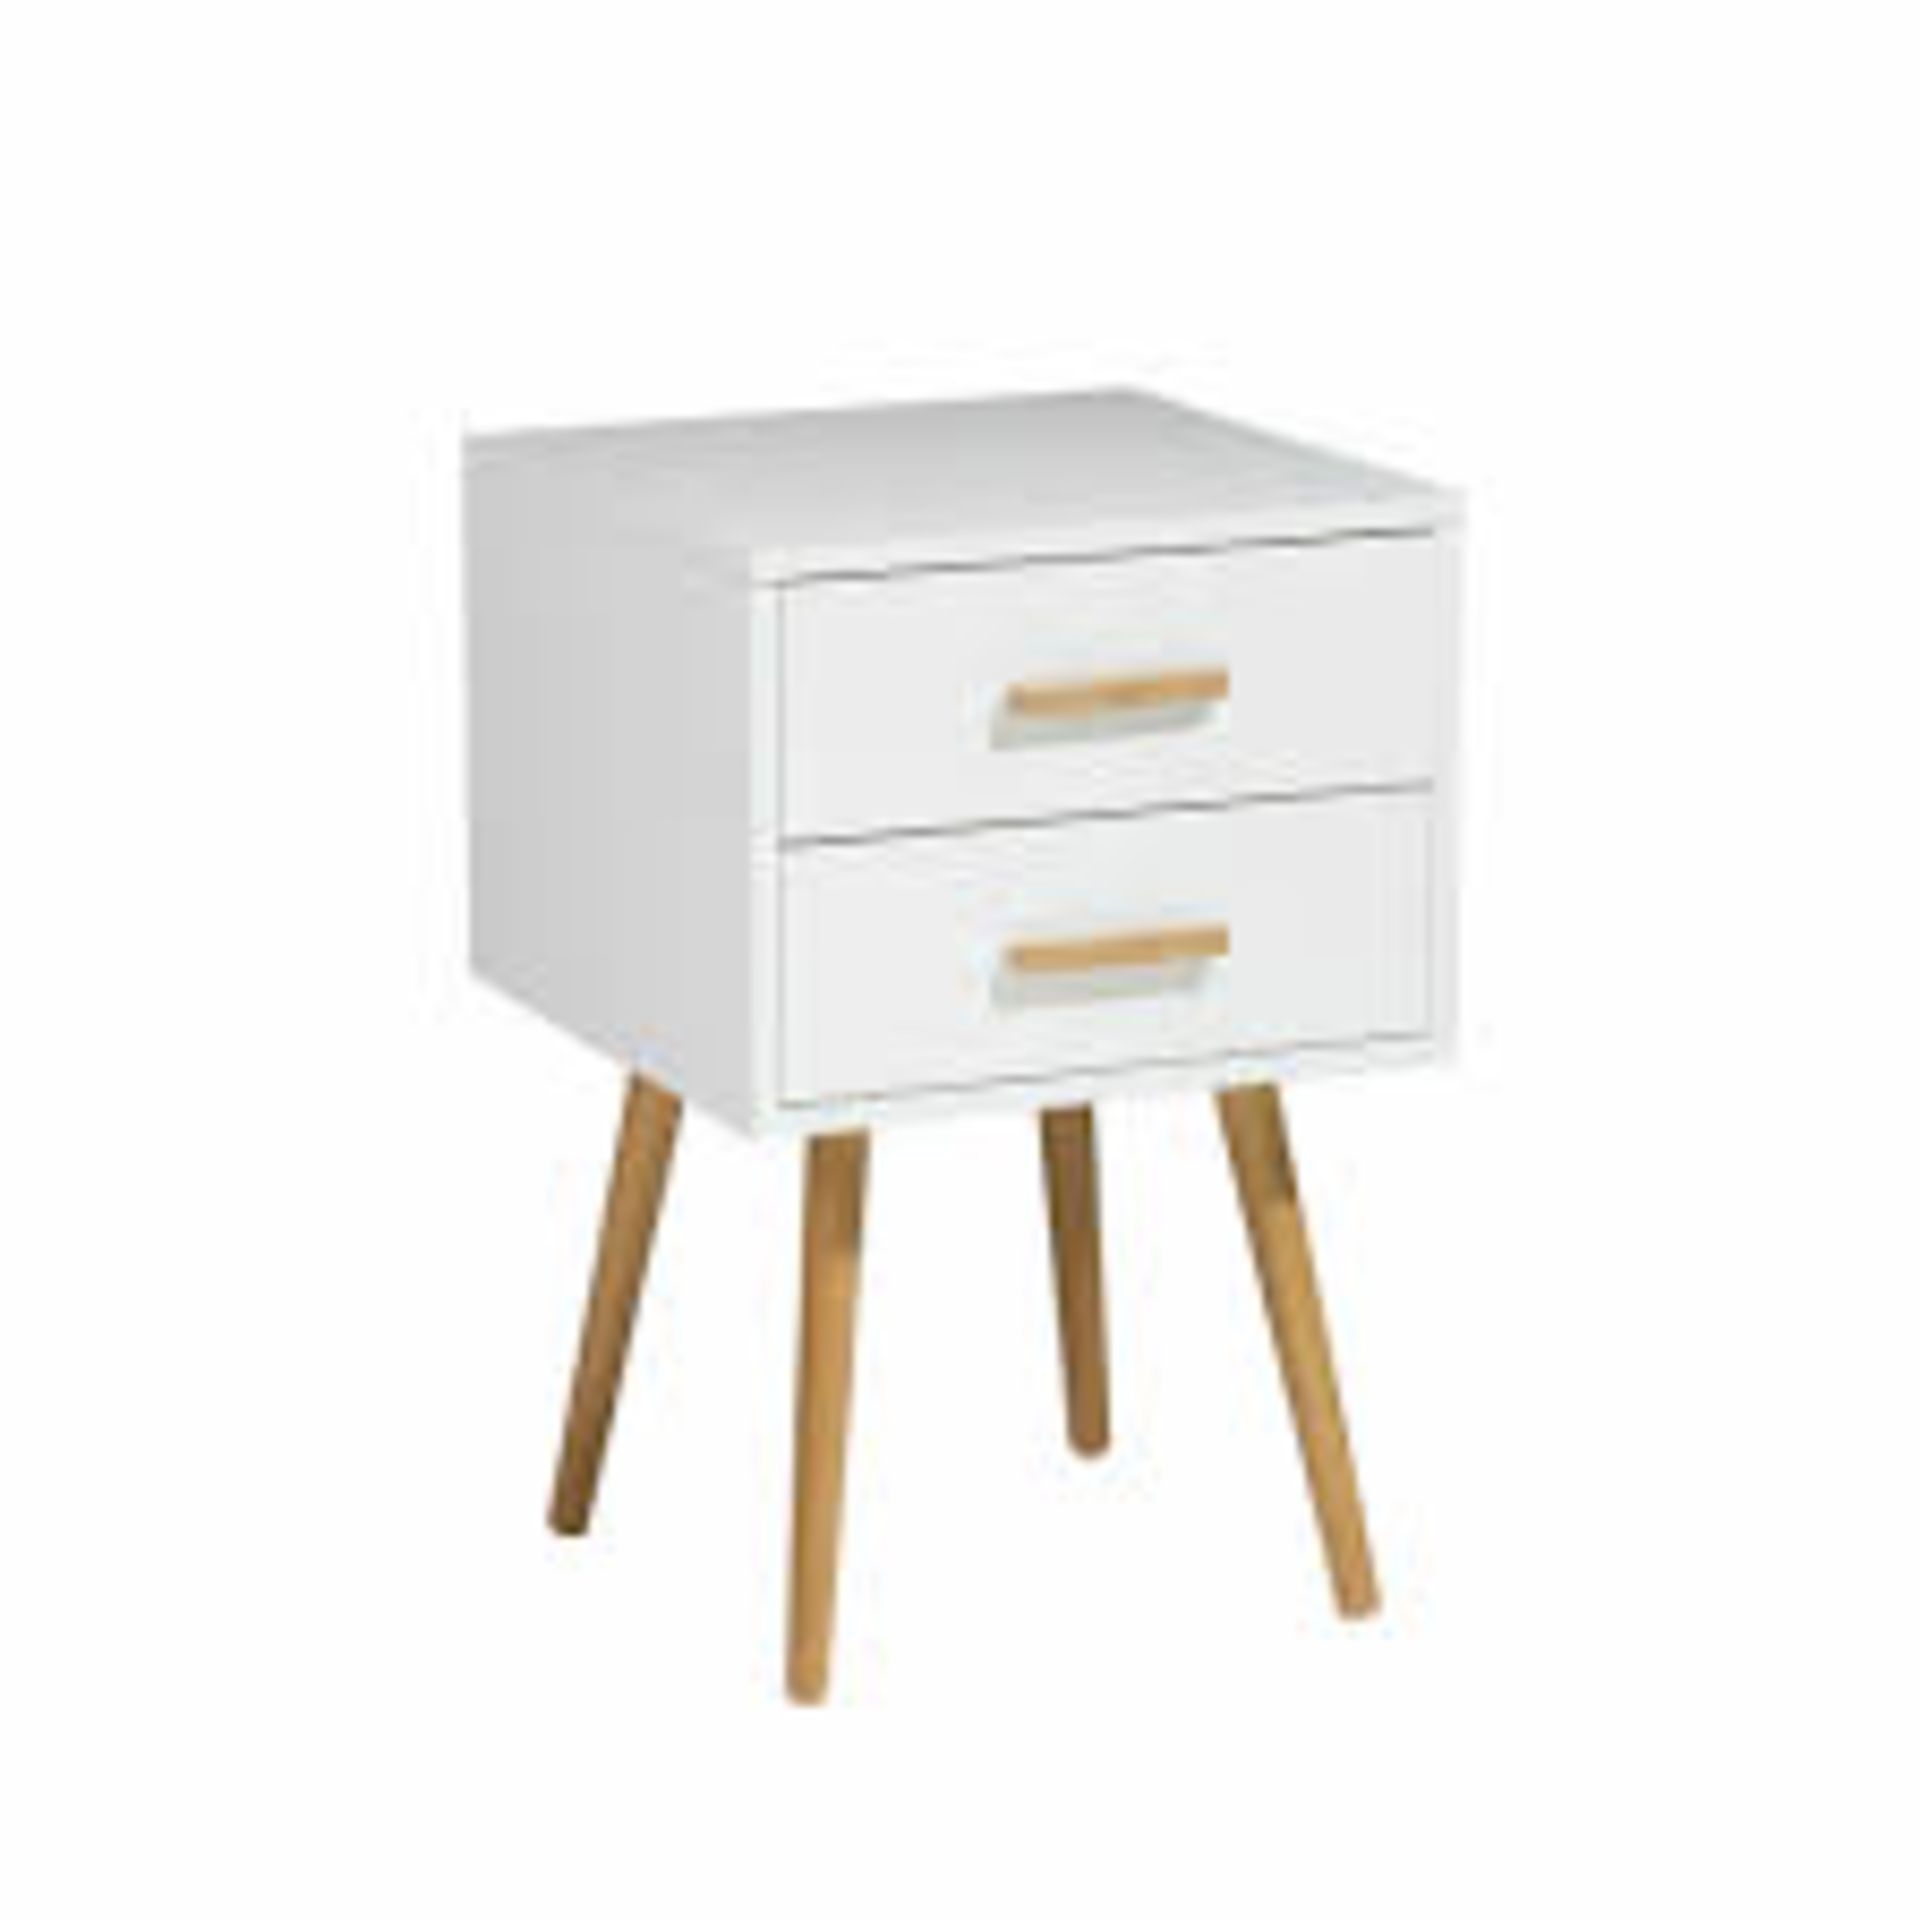 Boxed Abril 2 Drawer Bedside Table RRP £70 (18427) (Appraisals Available Upon Request)(Pictures